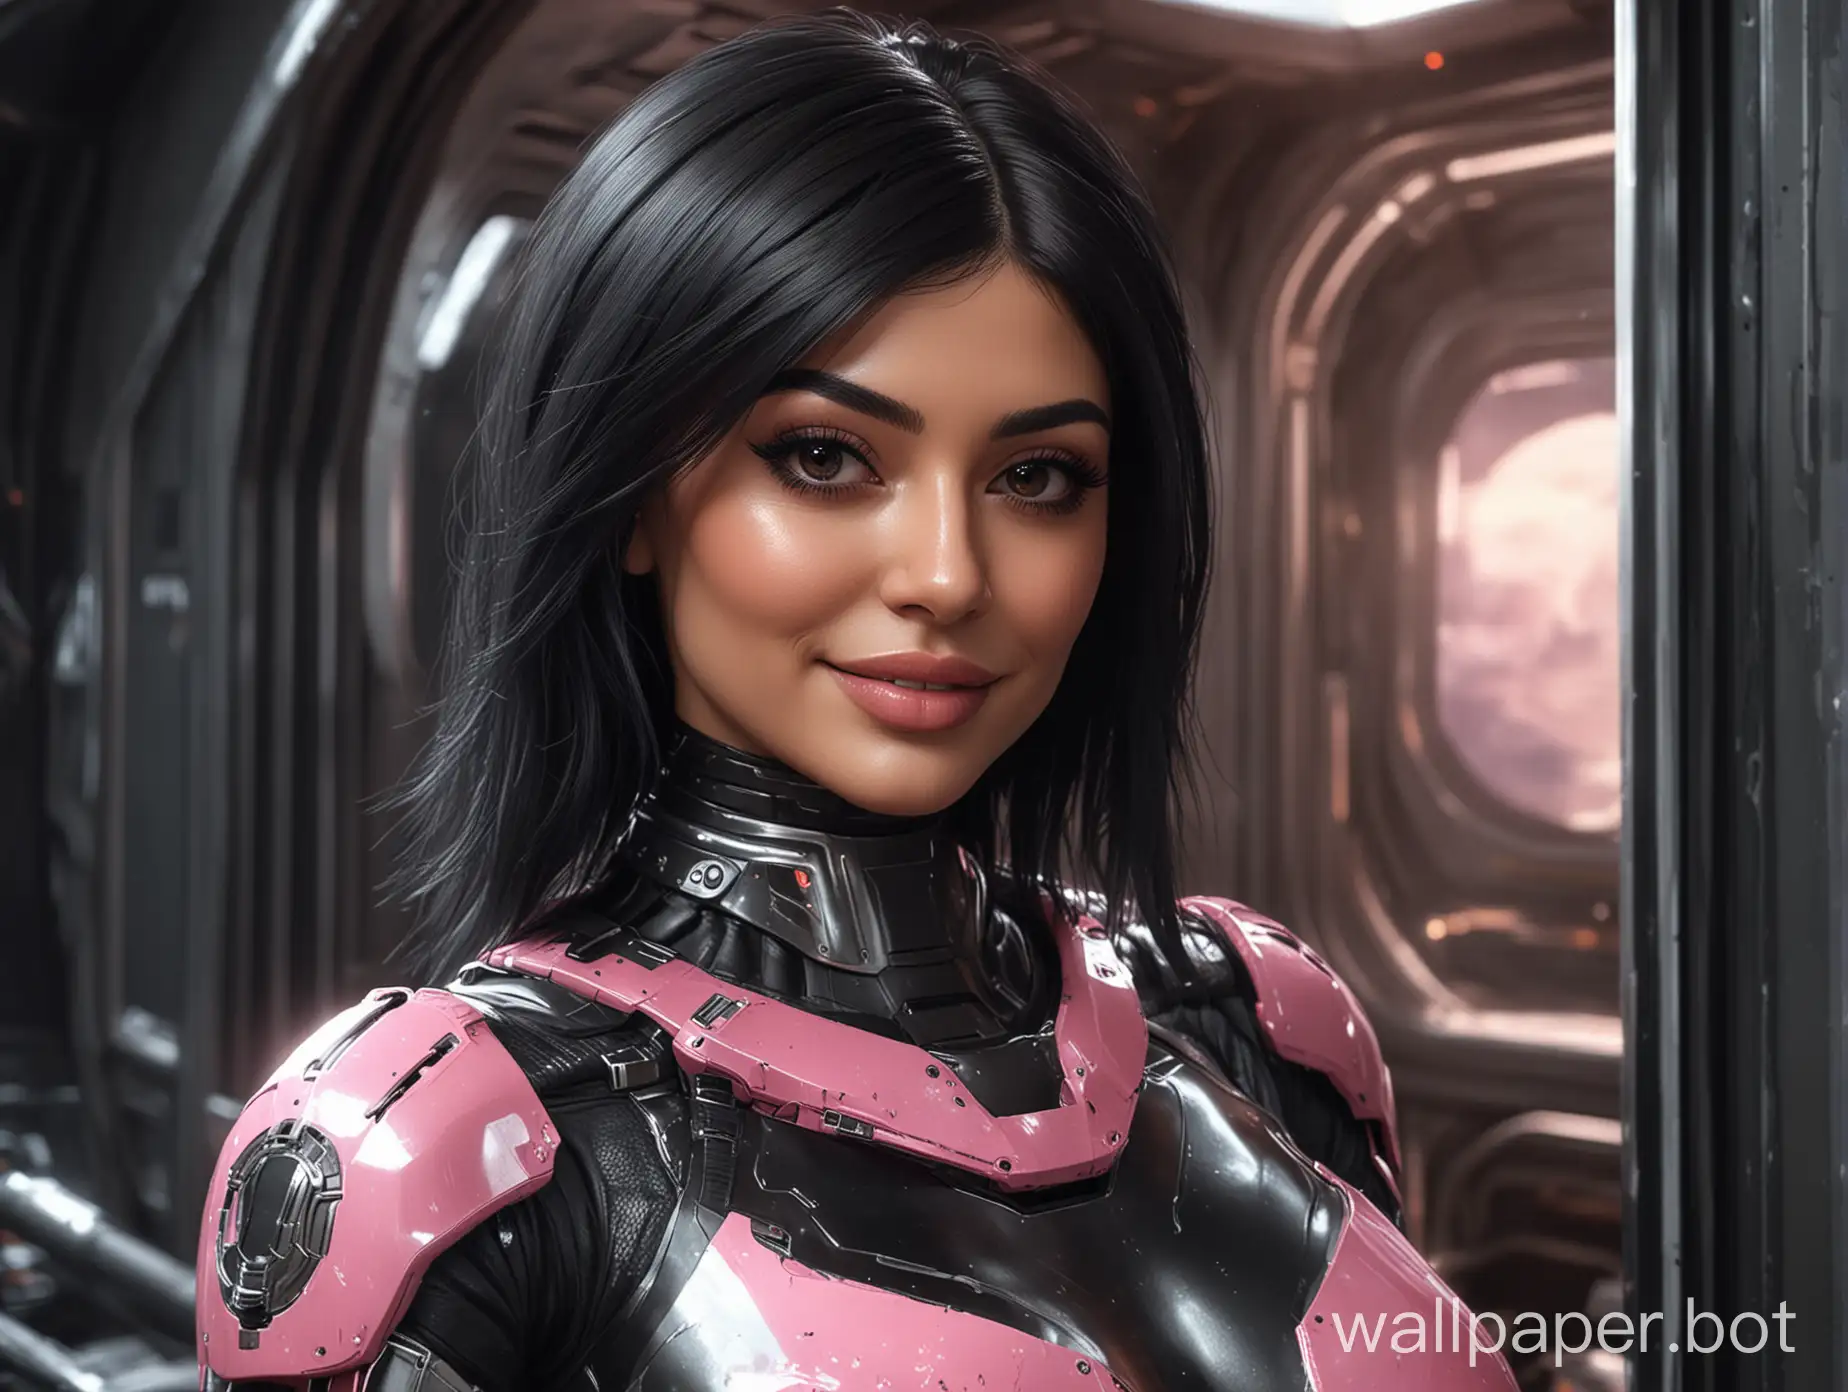 Star Citizen,female with kylie jenner face, selfie, Science-Fiction, close-up headshot, shiny cyber armor undersuit with the 3 colors Pink Black Silver, curvy female bodyshape, stars and planet through a window in the background, black long hair, natural black eyes, futuristic headgear, sexy smiling with showing teeth